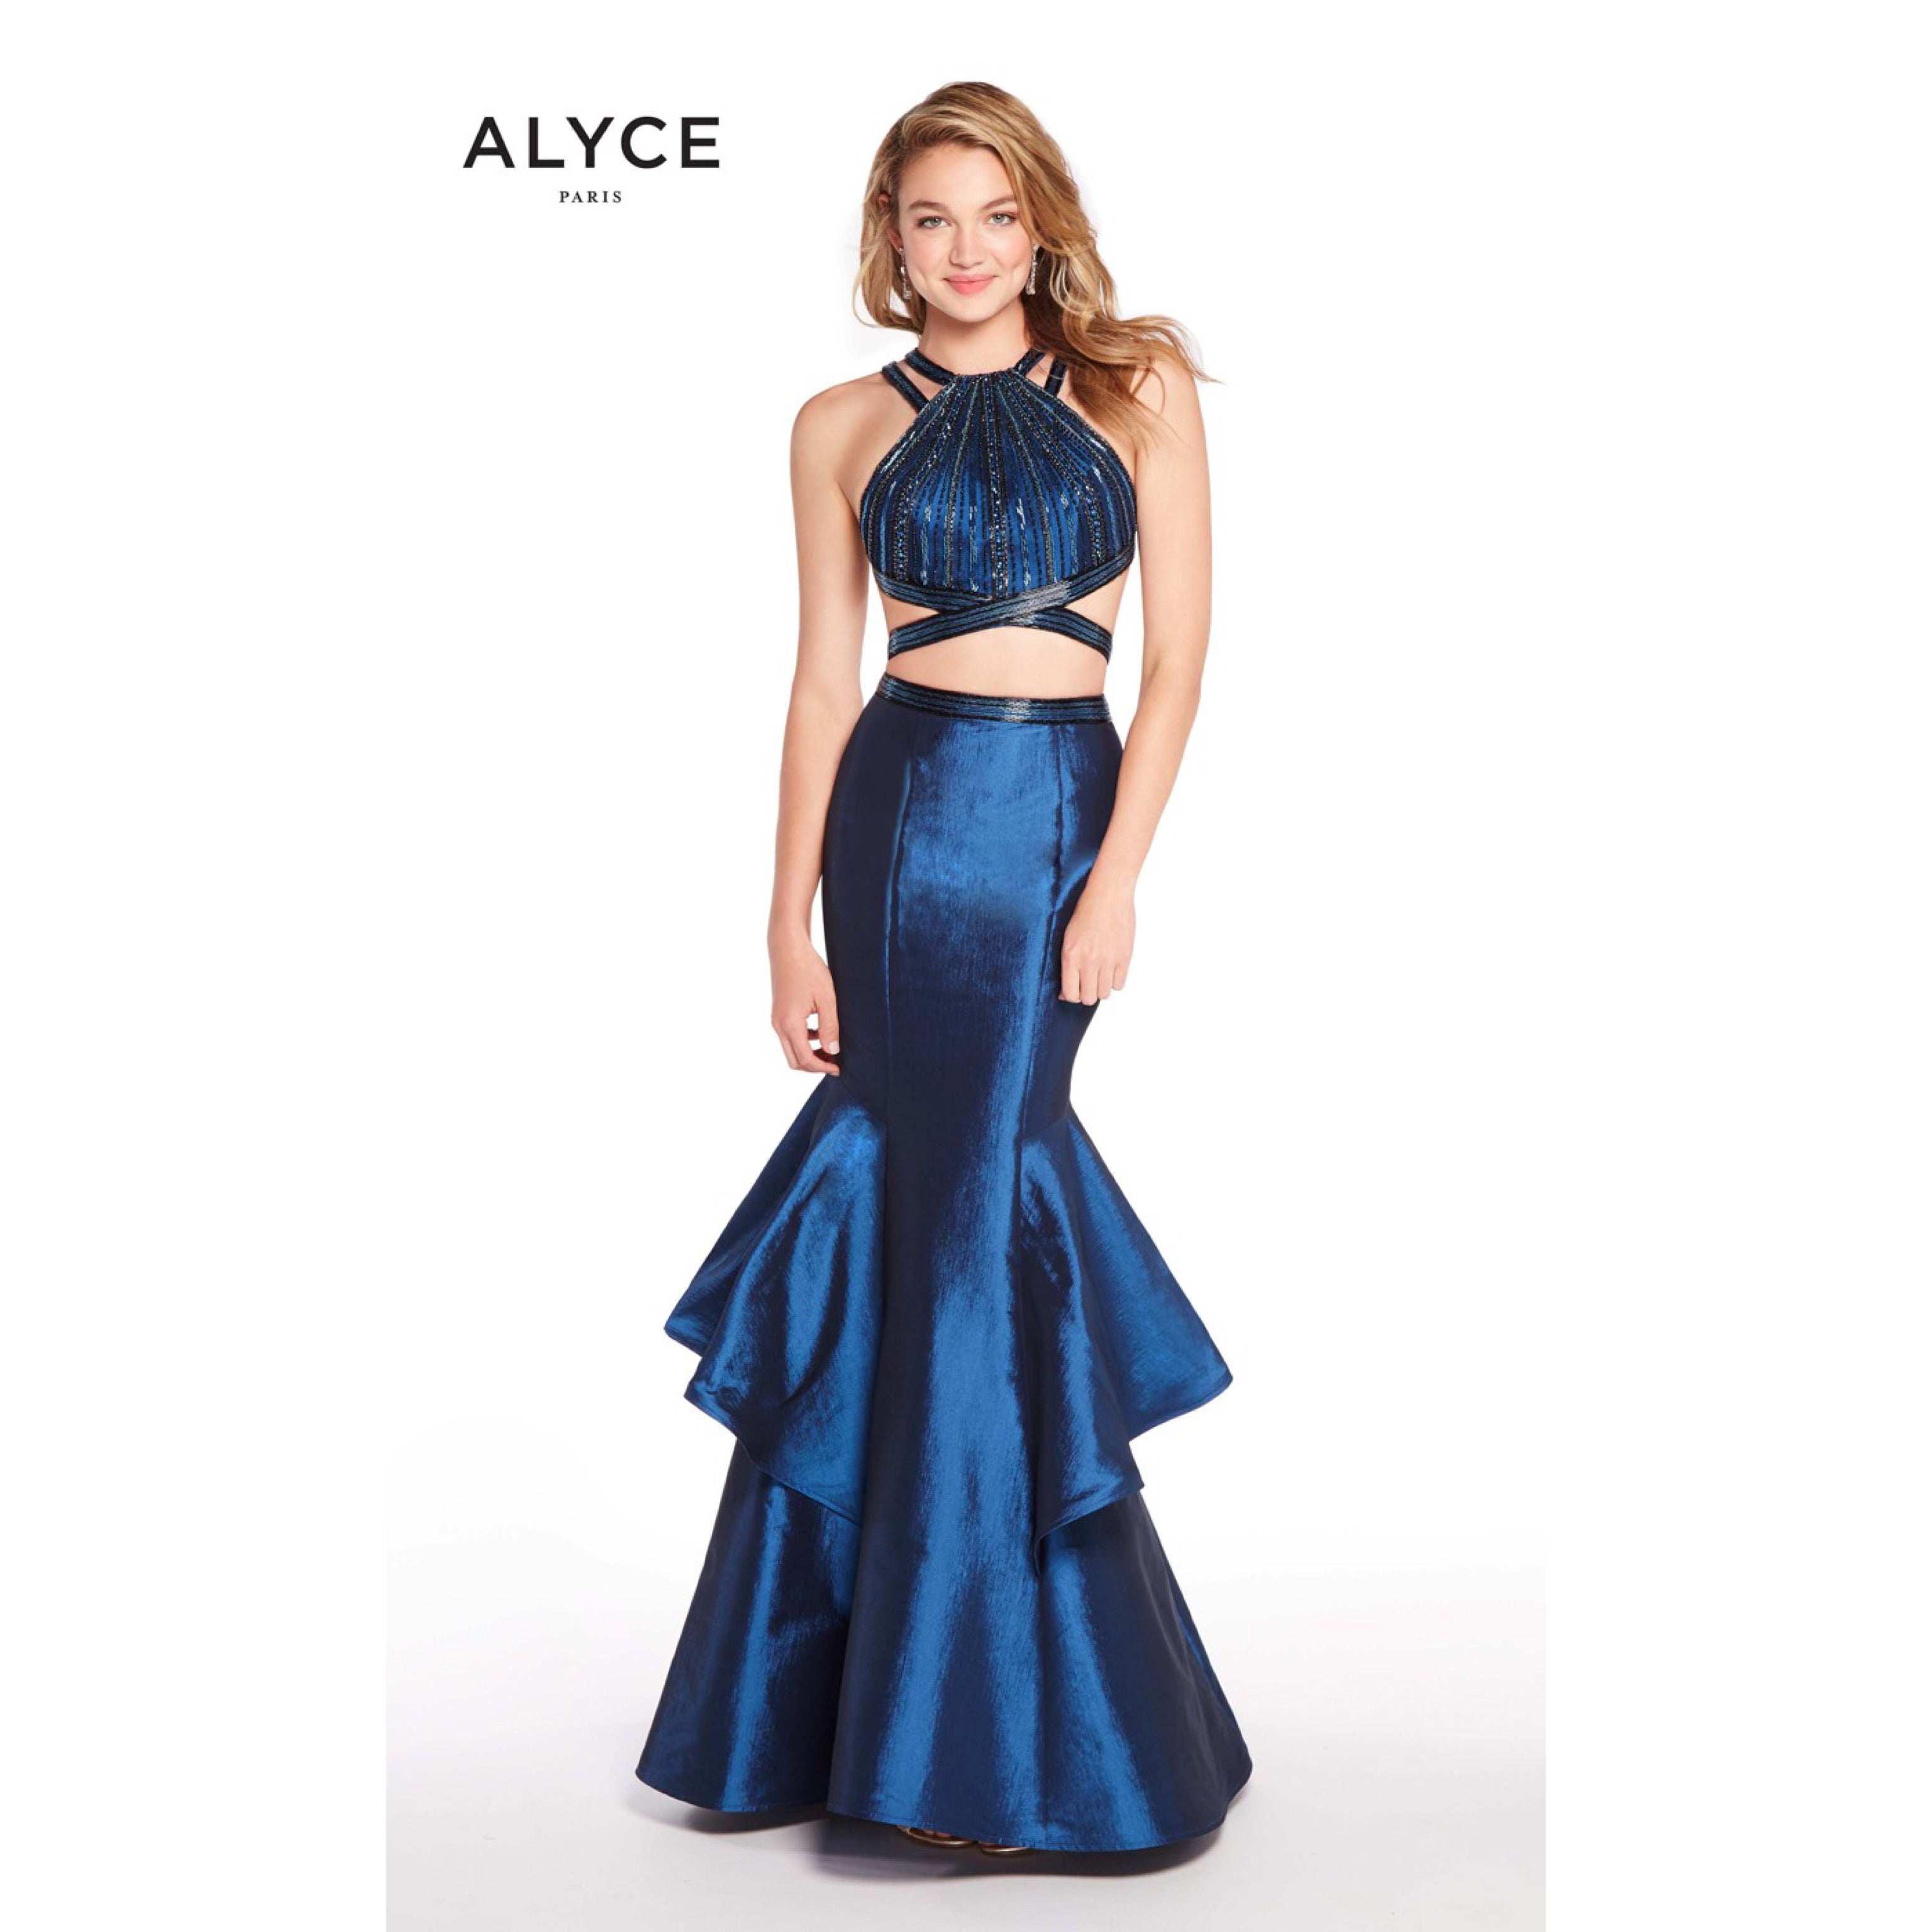 Alyce peacock blue beaded 2-piece dress, sizes 2 and 4, NEW WITH TAGS!